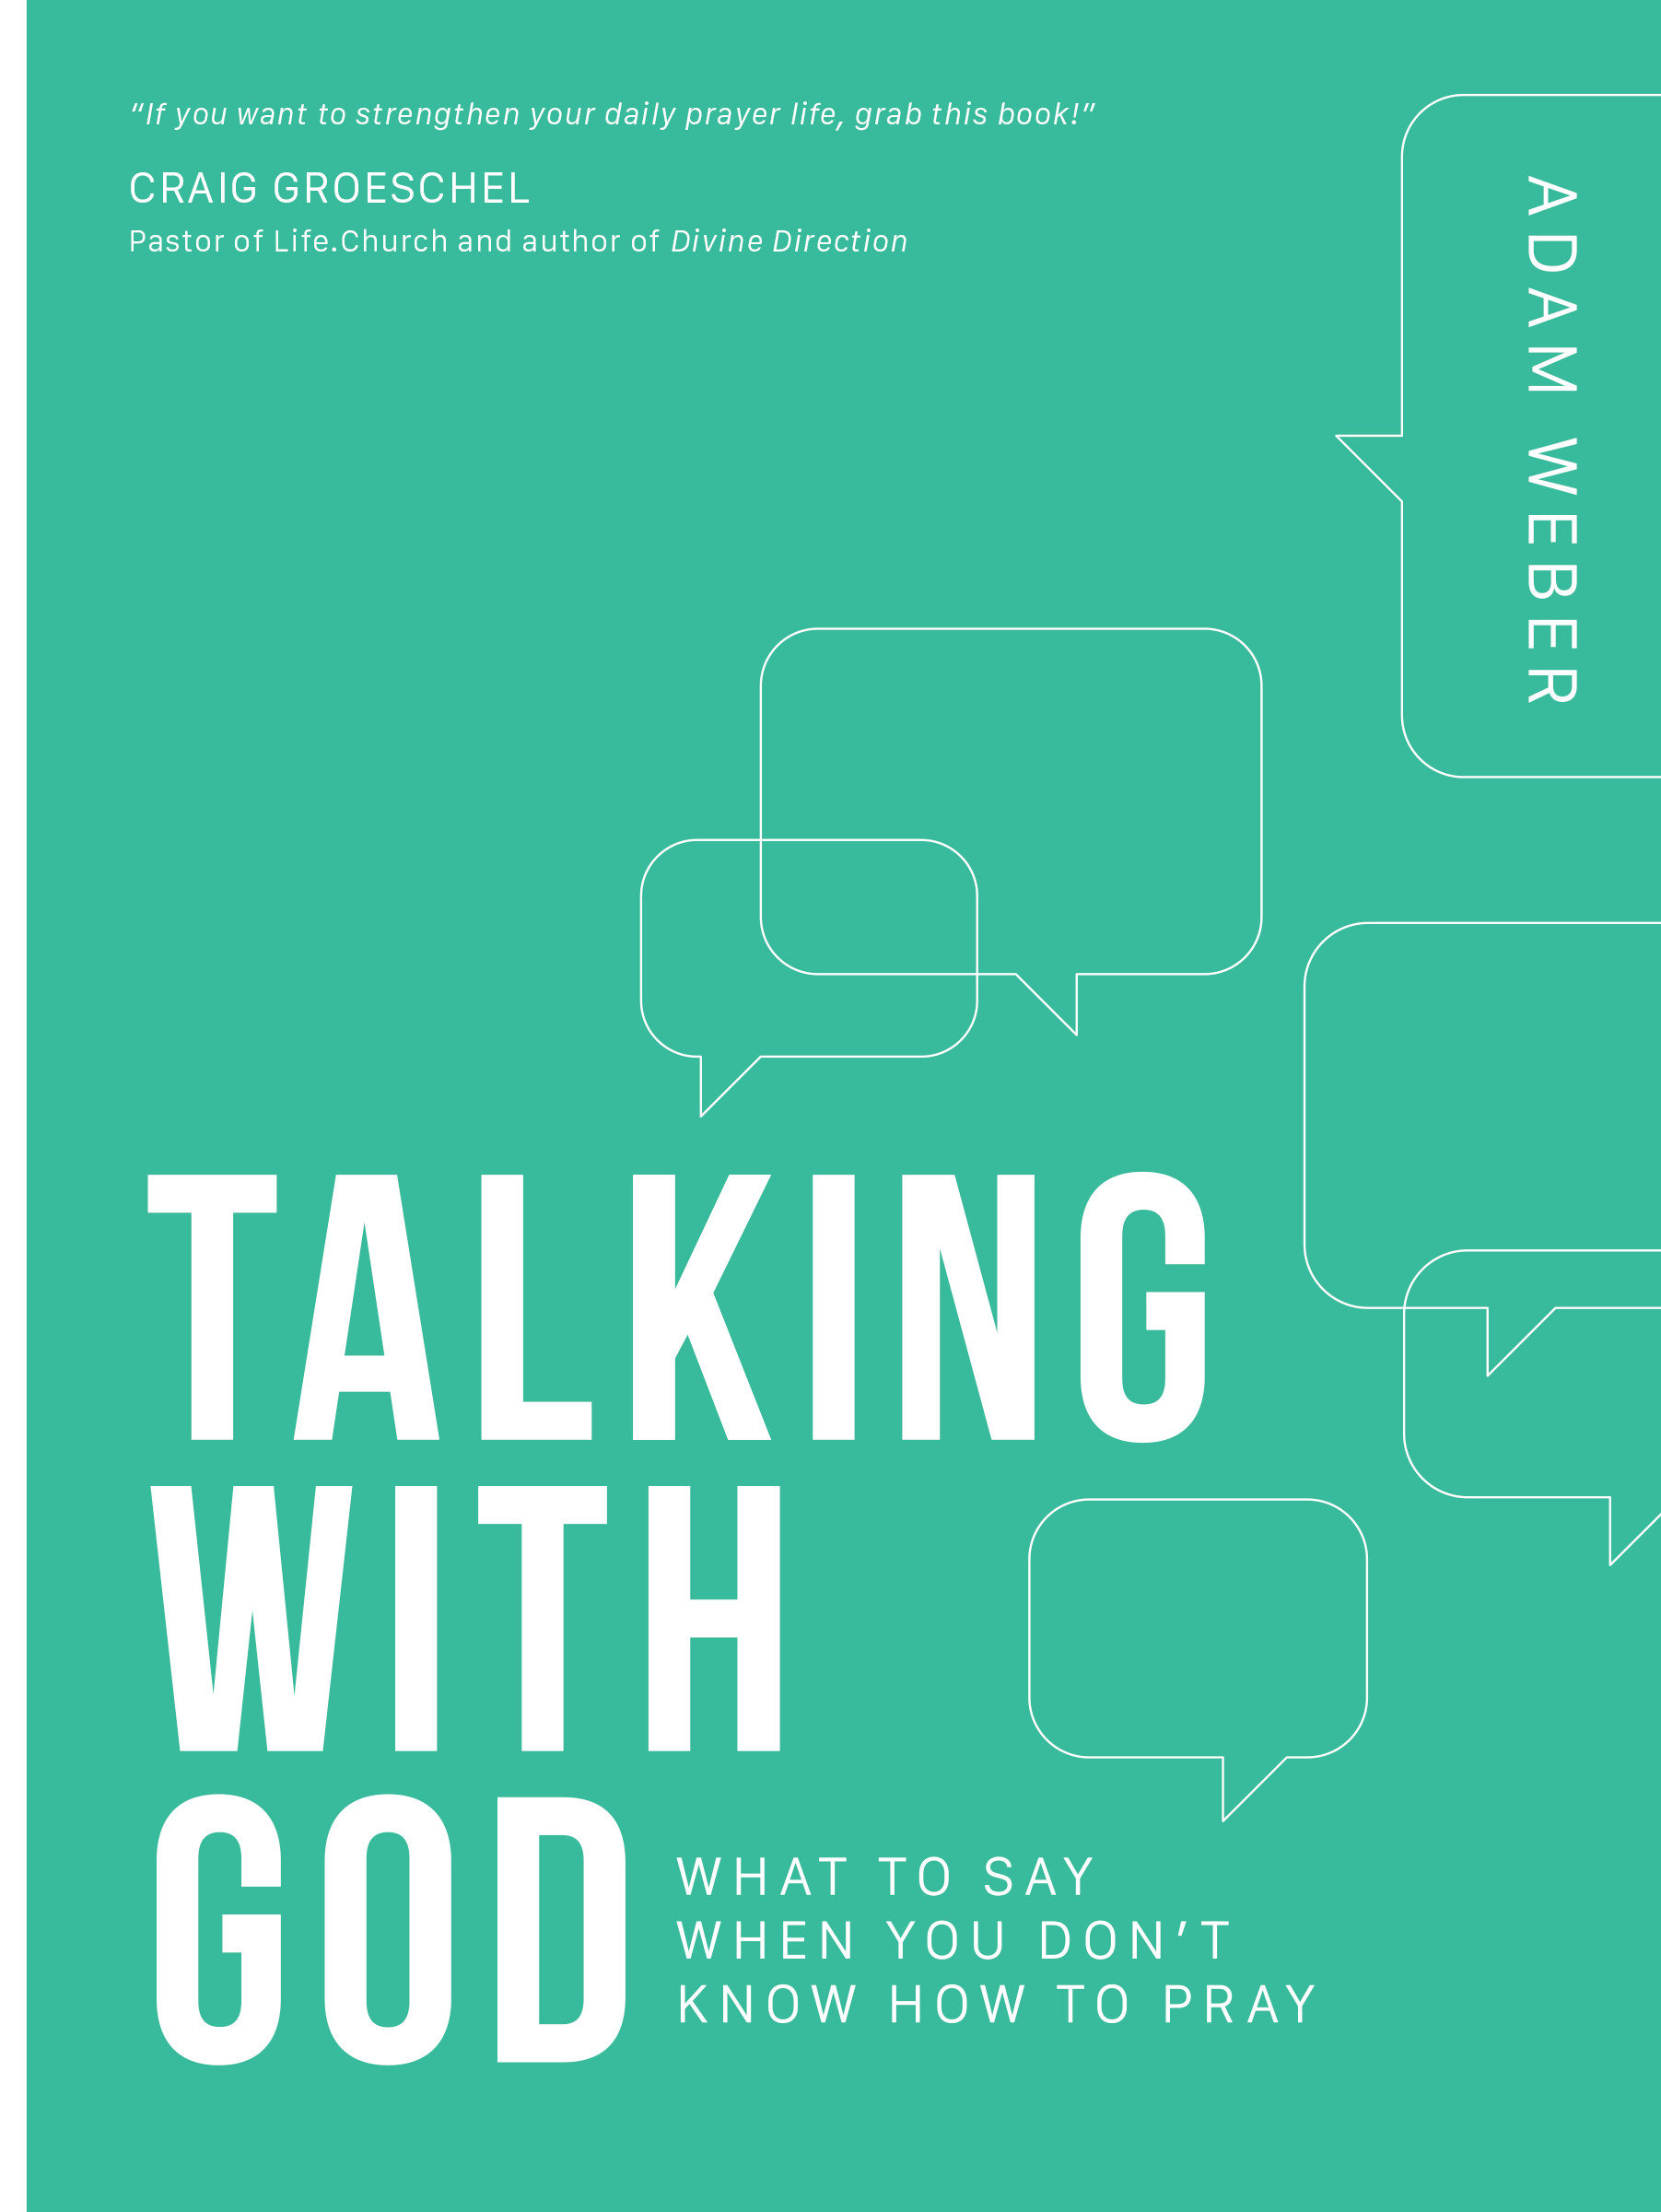 Talking with God what to say when you don't know how to pray cover image